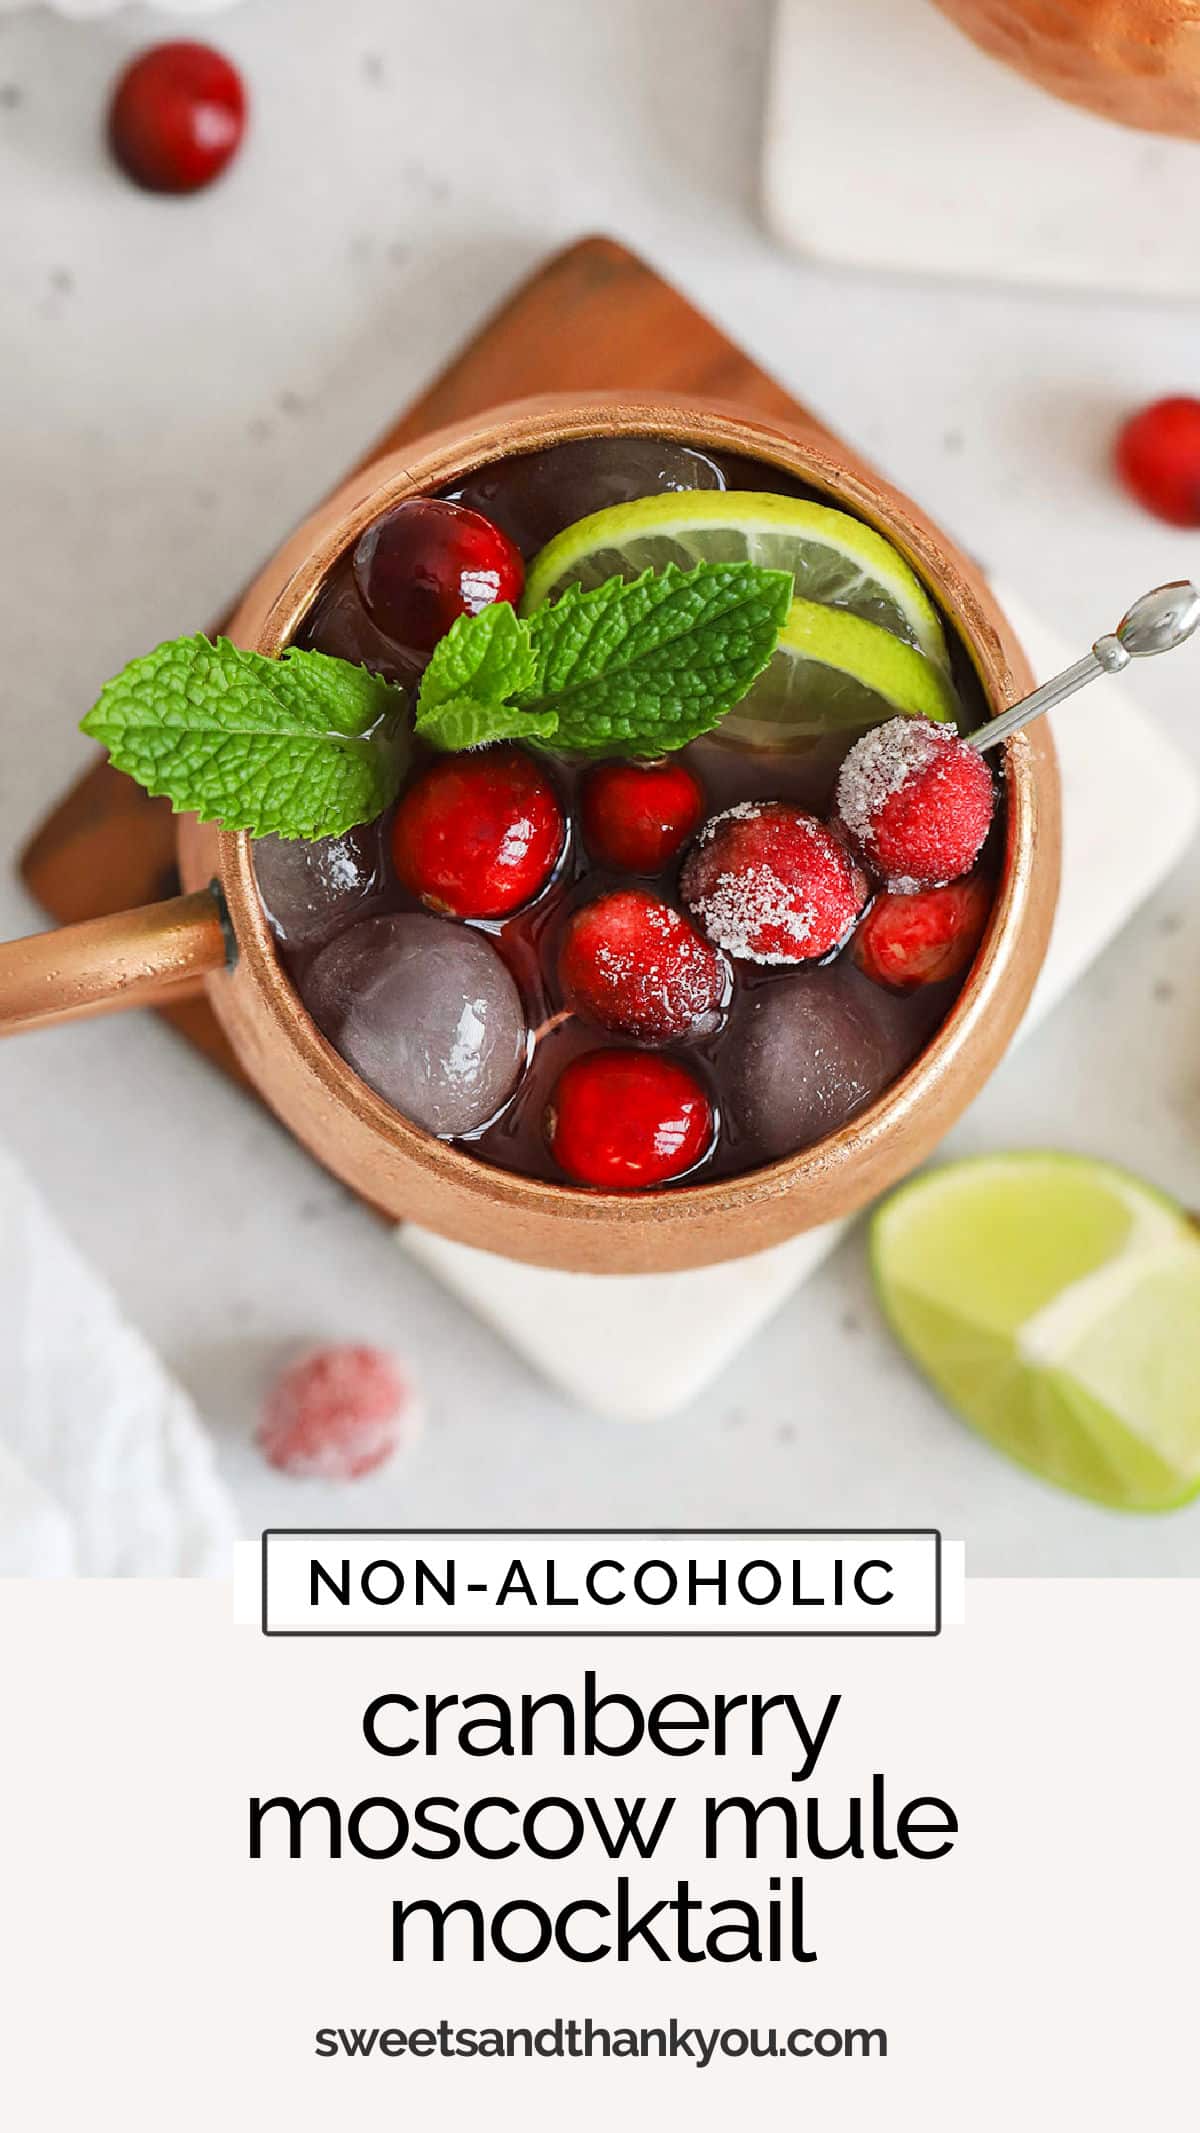 Our festive Cranberry Moscow Mule Mocktail recipe is a perfect holiday drink. With a fizzy mix of fresh & warm flavors and fun seasonal colors, this pretty red mocktail is the perfect holiday mocktail recipe for Thanksgiving, Christmas, New Year's Eve and more! 